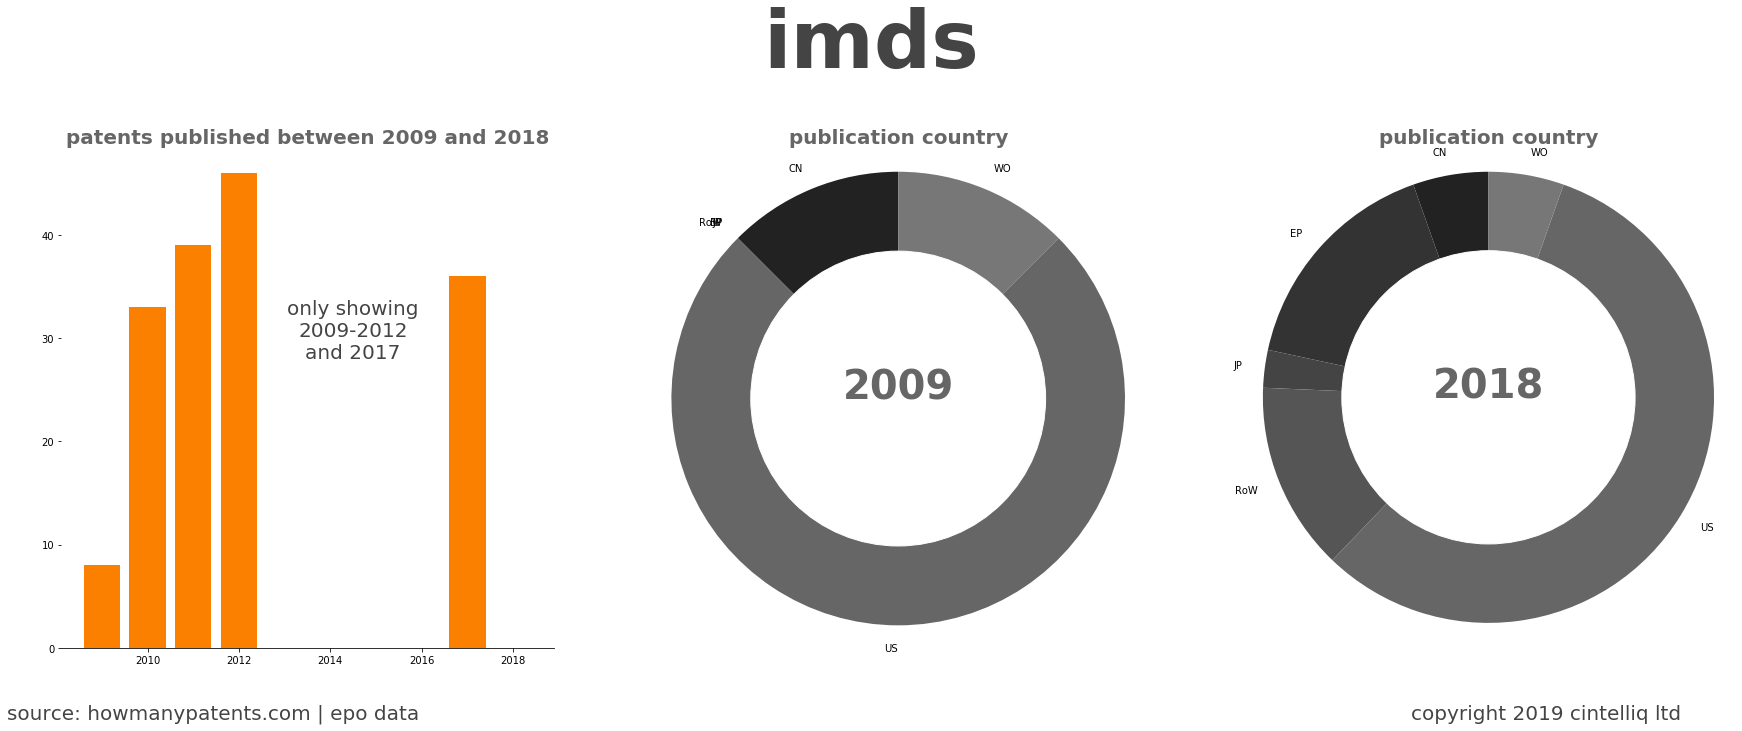 summary of patents for Imds